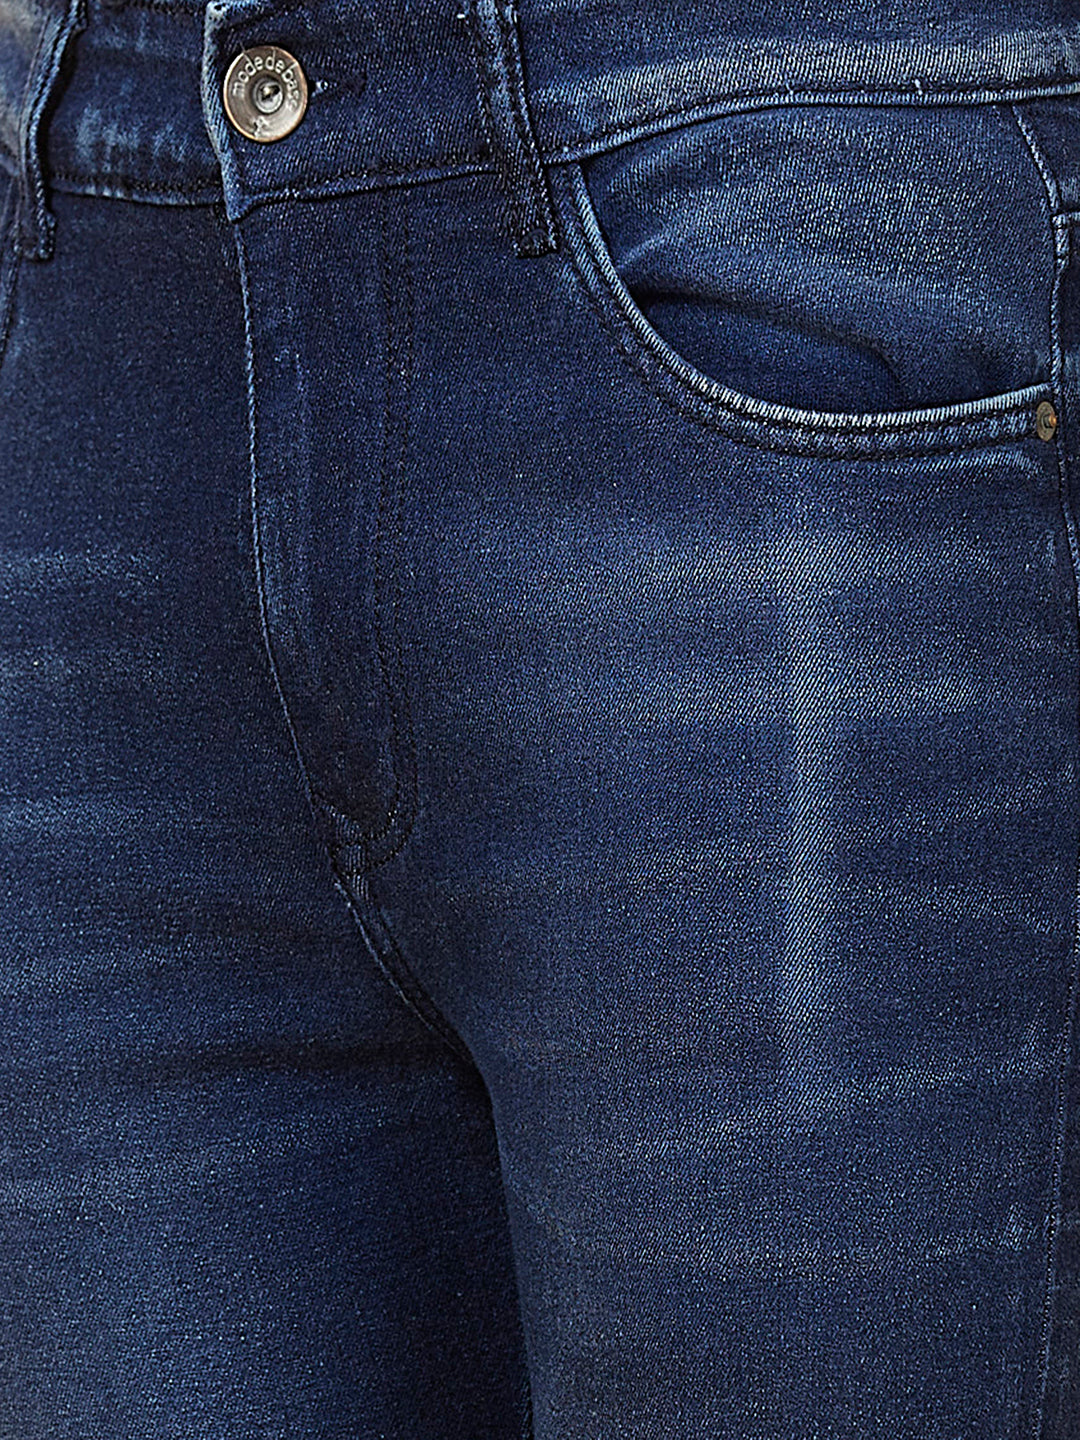 Indigo Blue Bootcut Jeans with Whiskers